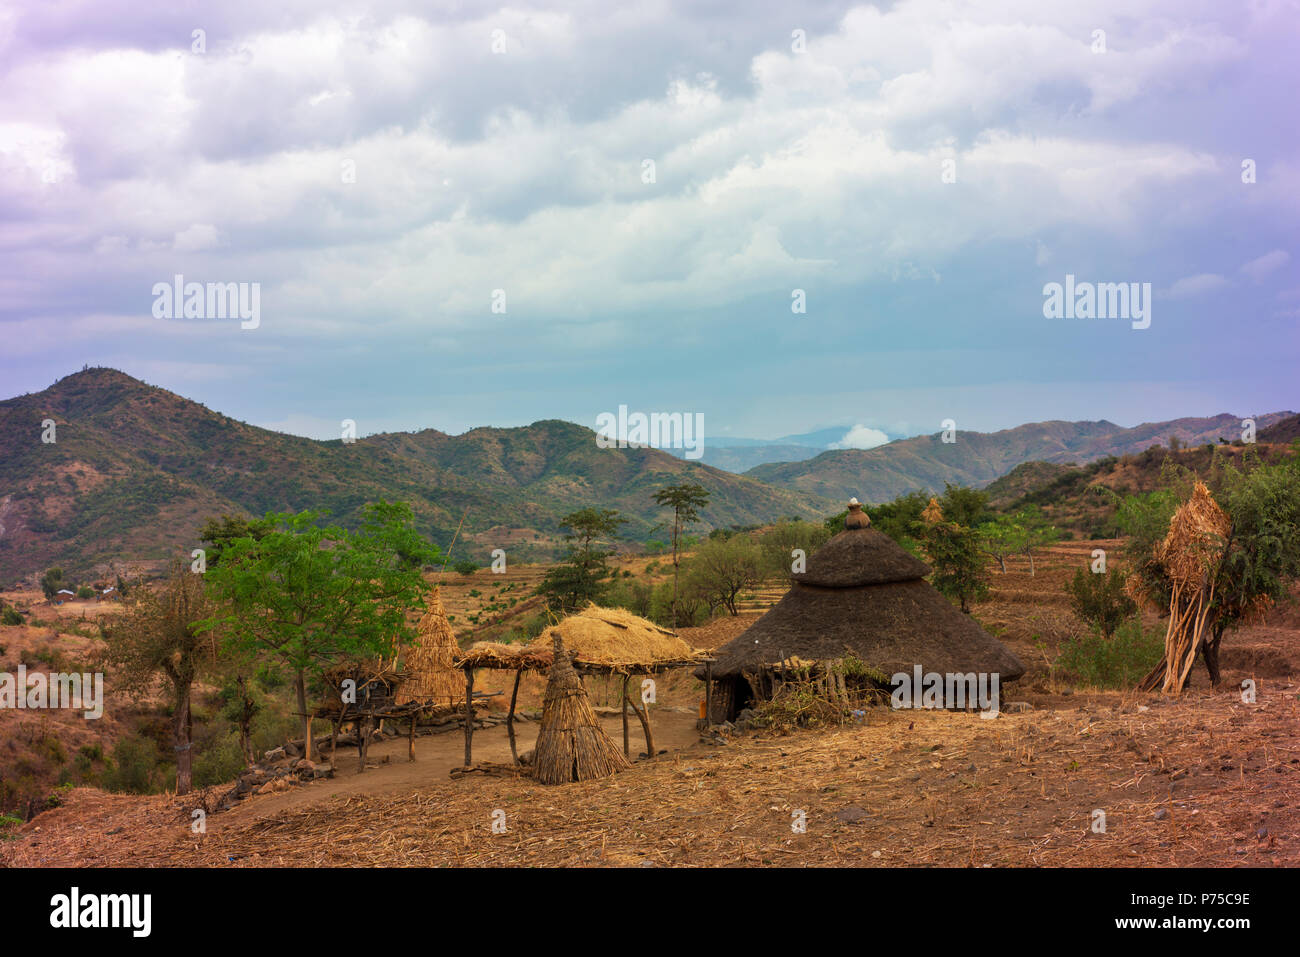 Typical rural scene in south western Ethiopia showing traditional home. Stock Photo